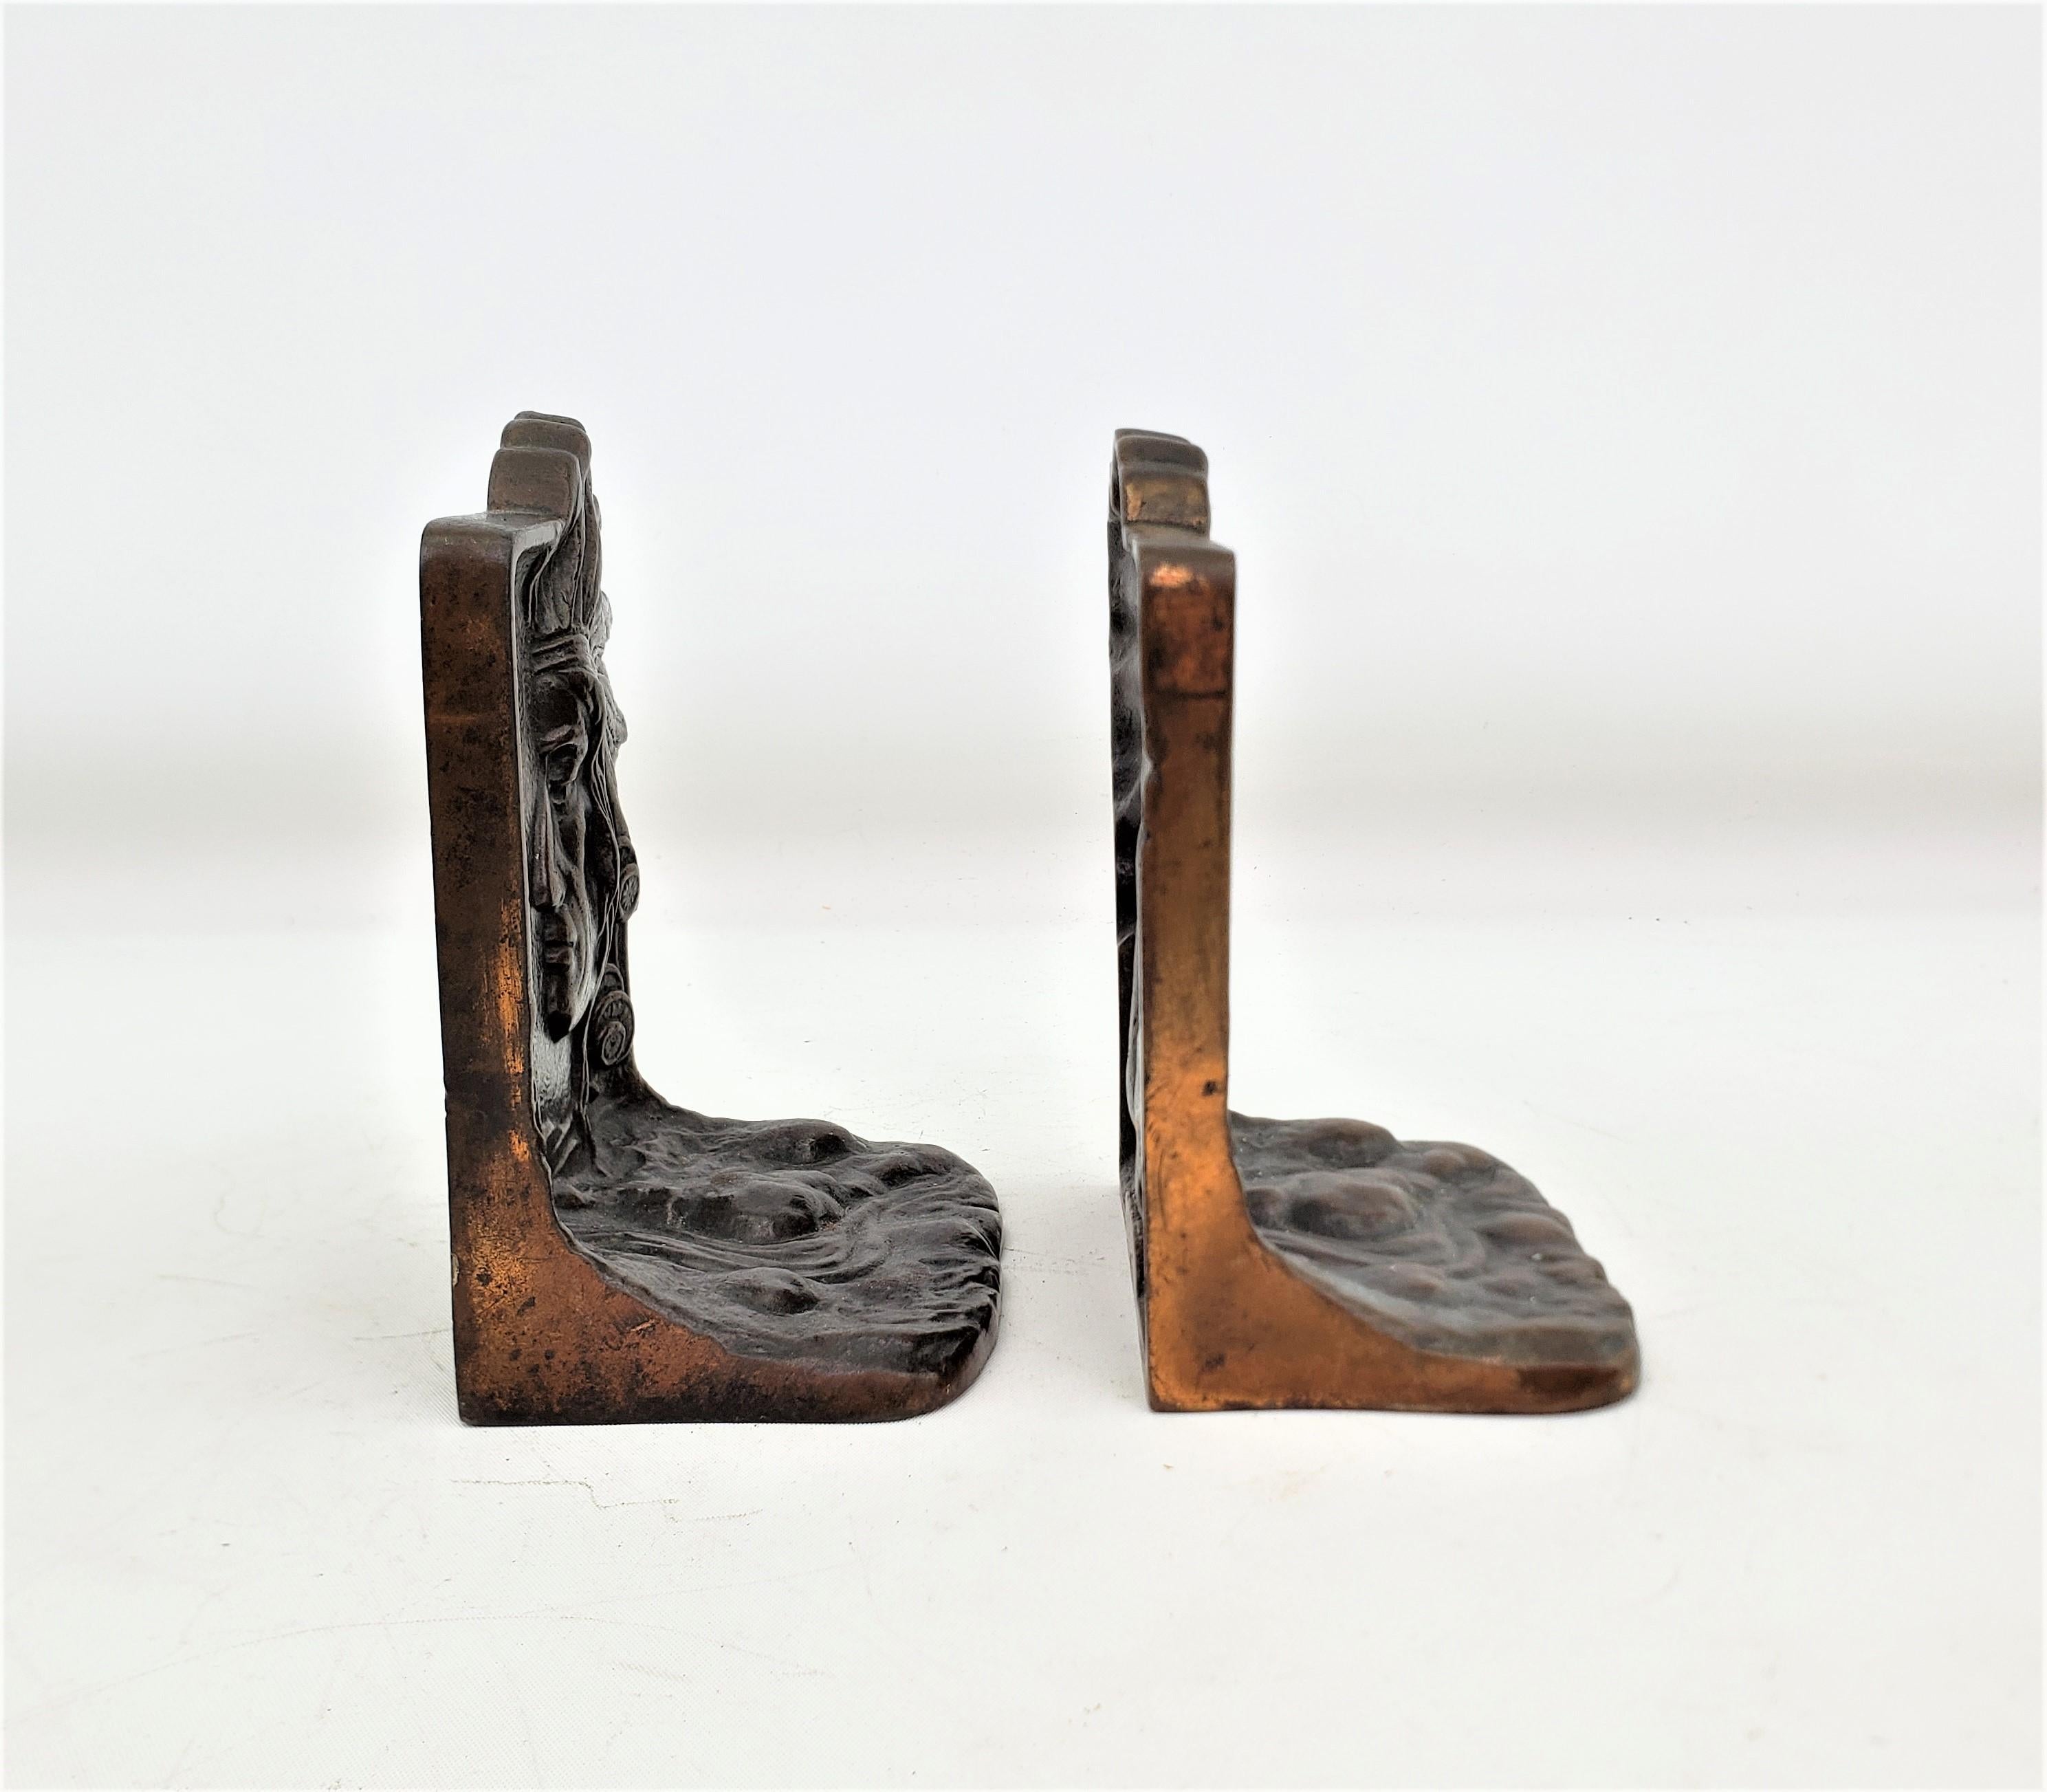 Antique Art Deco Cast & Patinated Bookends Depicting an Indigenous Warrior For Sale 2